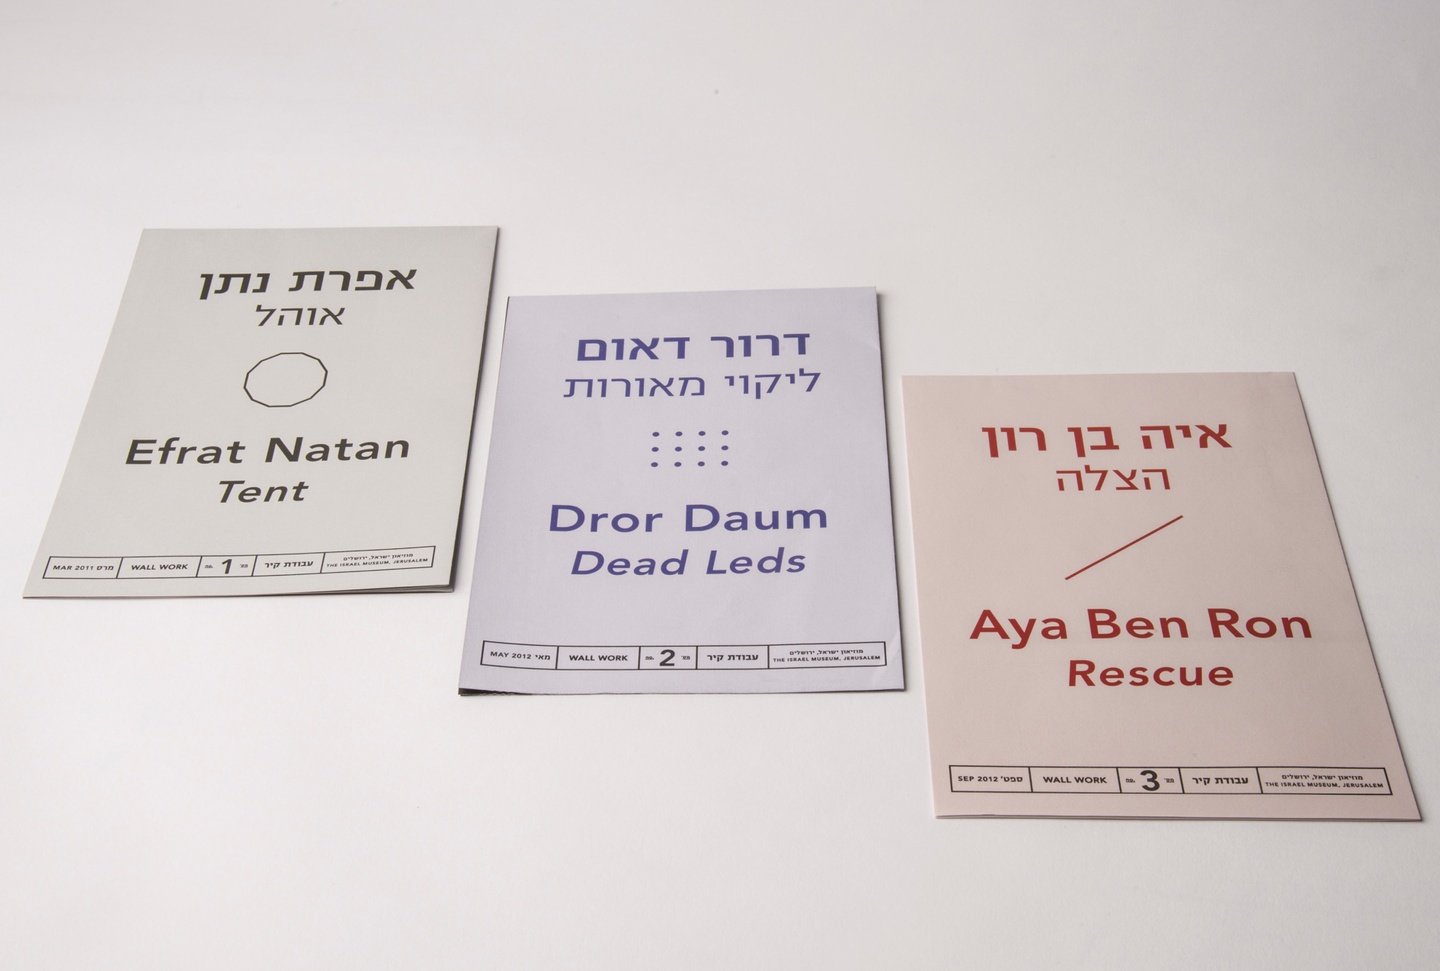 Three pastel-toned booklets laid out on a white background (from left to right, in gray, lavender/blue, and orange/coral/red). The covers include artists' names with titles below, in both Hebrew and English, a geometric pattern in the center, and supplementary information at the bottom in a row.